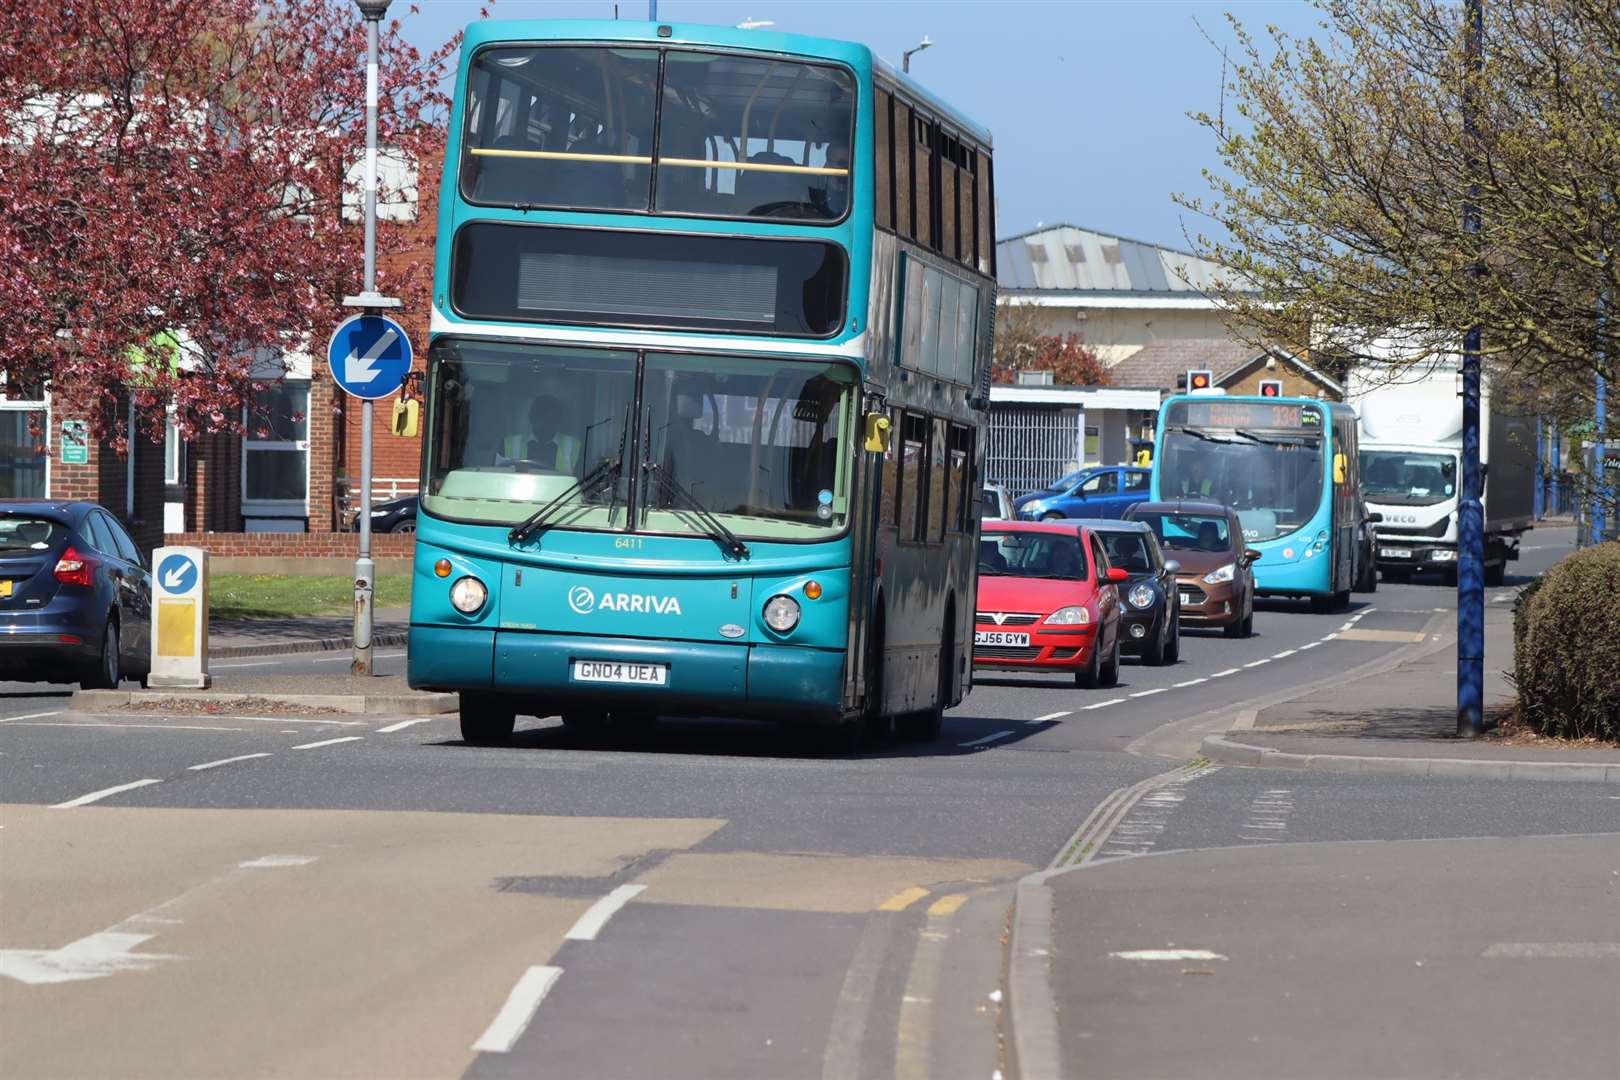 Buses remain a key source of pollution